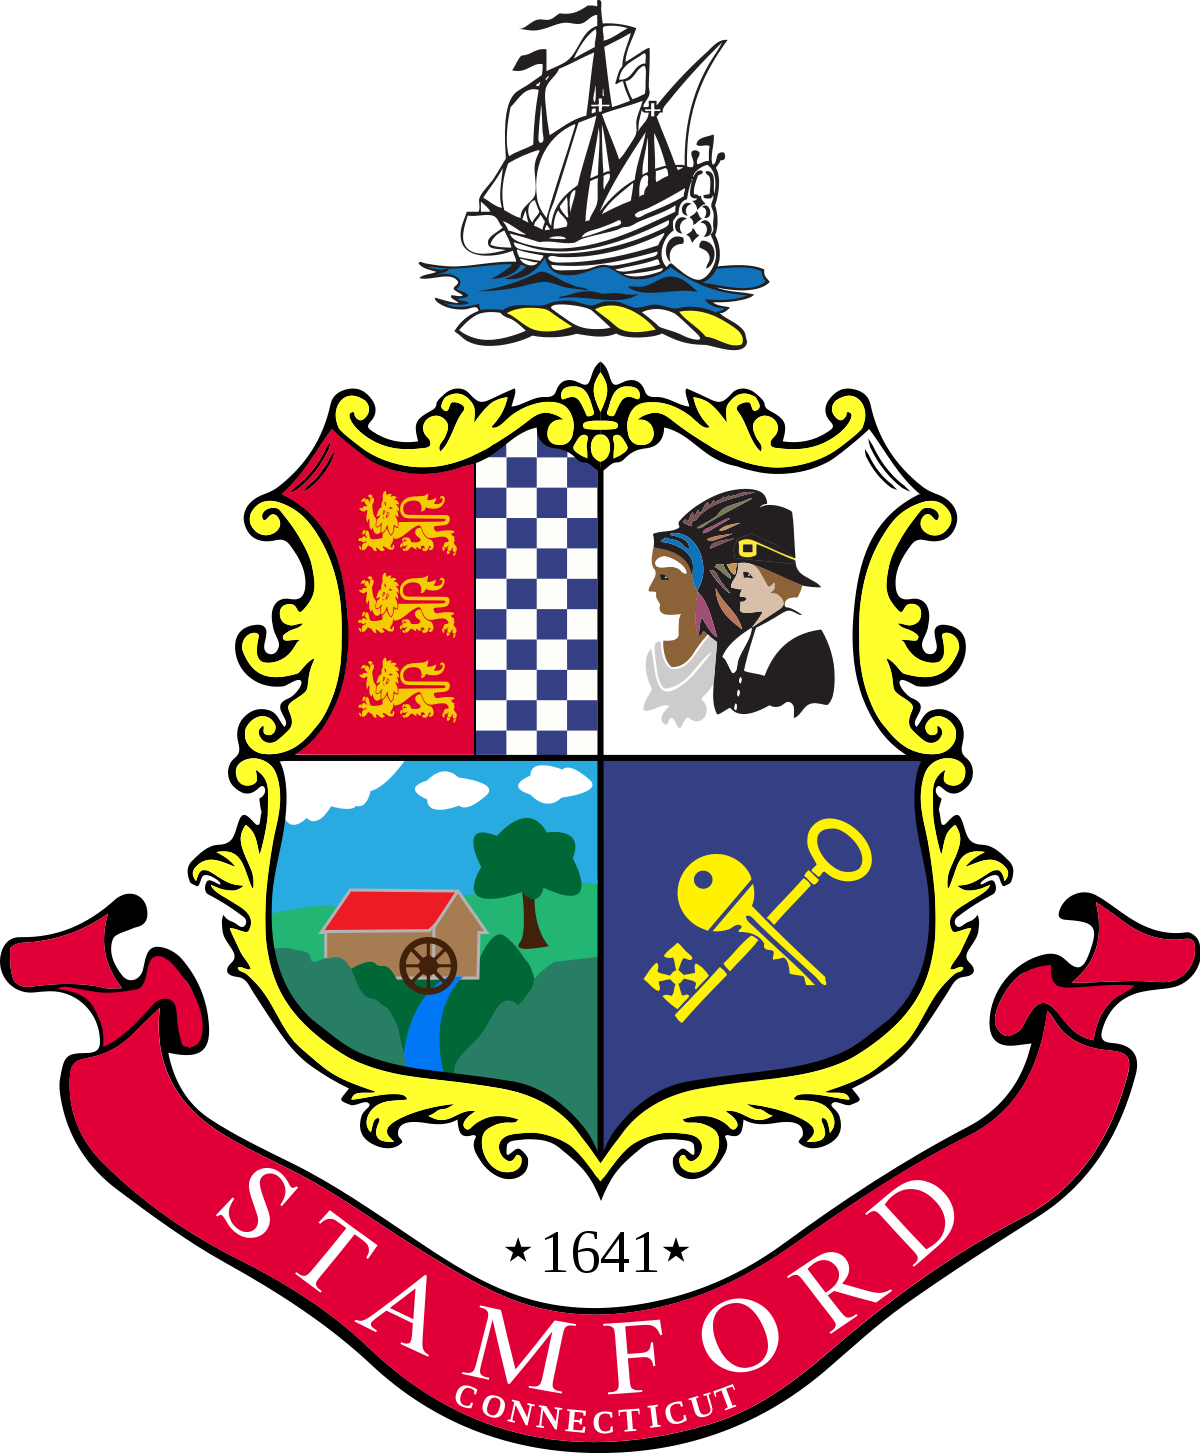 The City of Stamford, CT